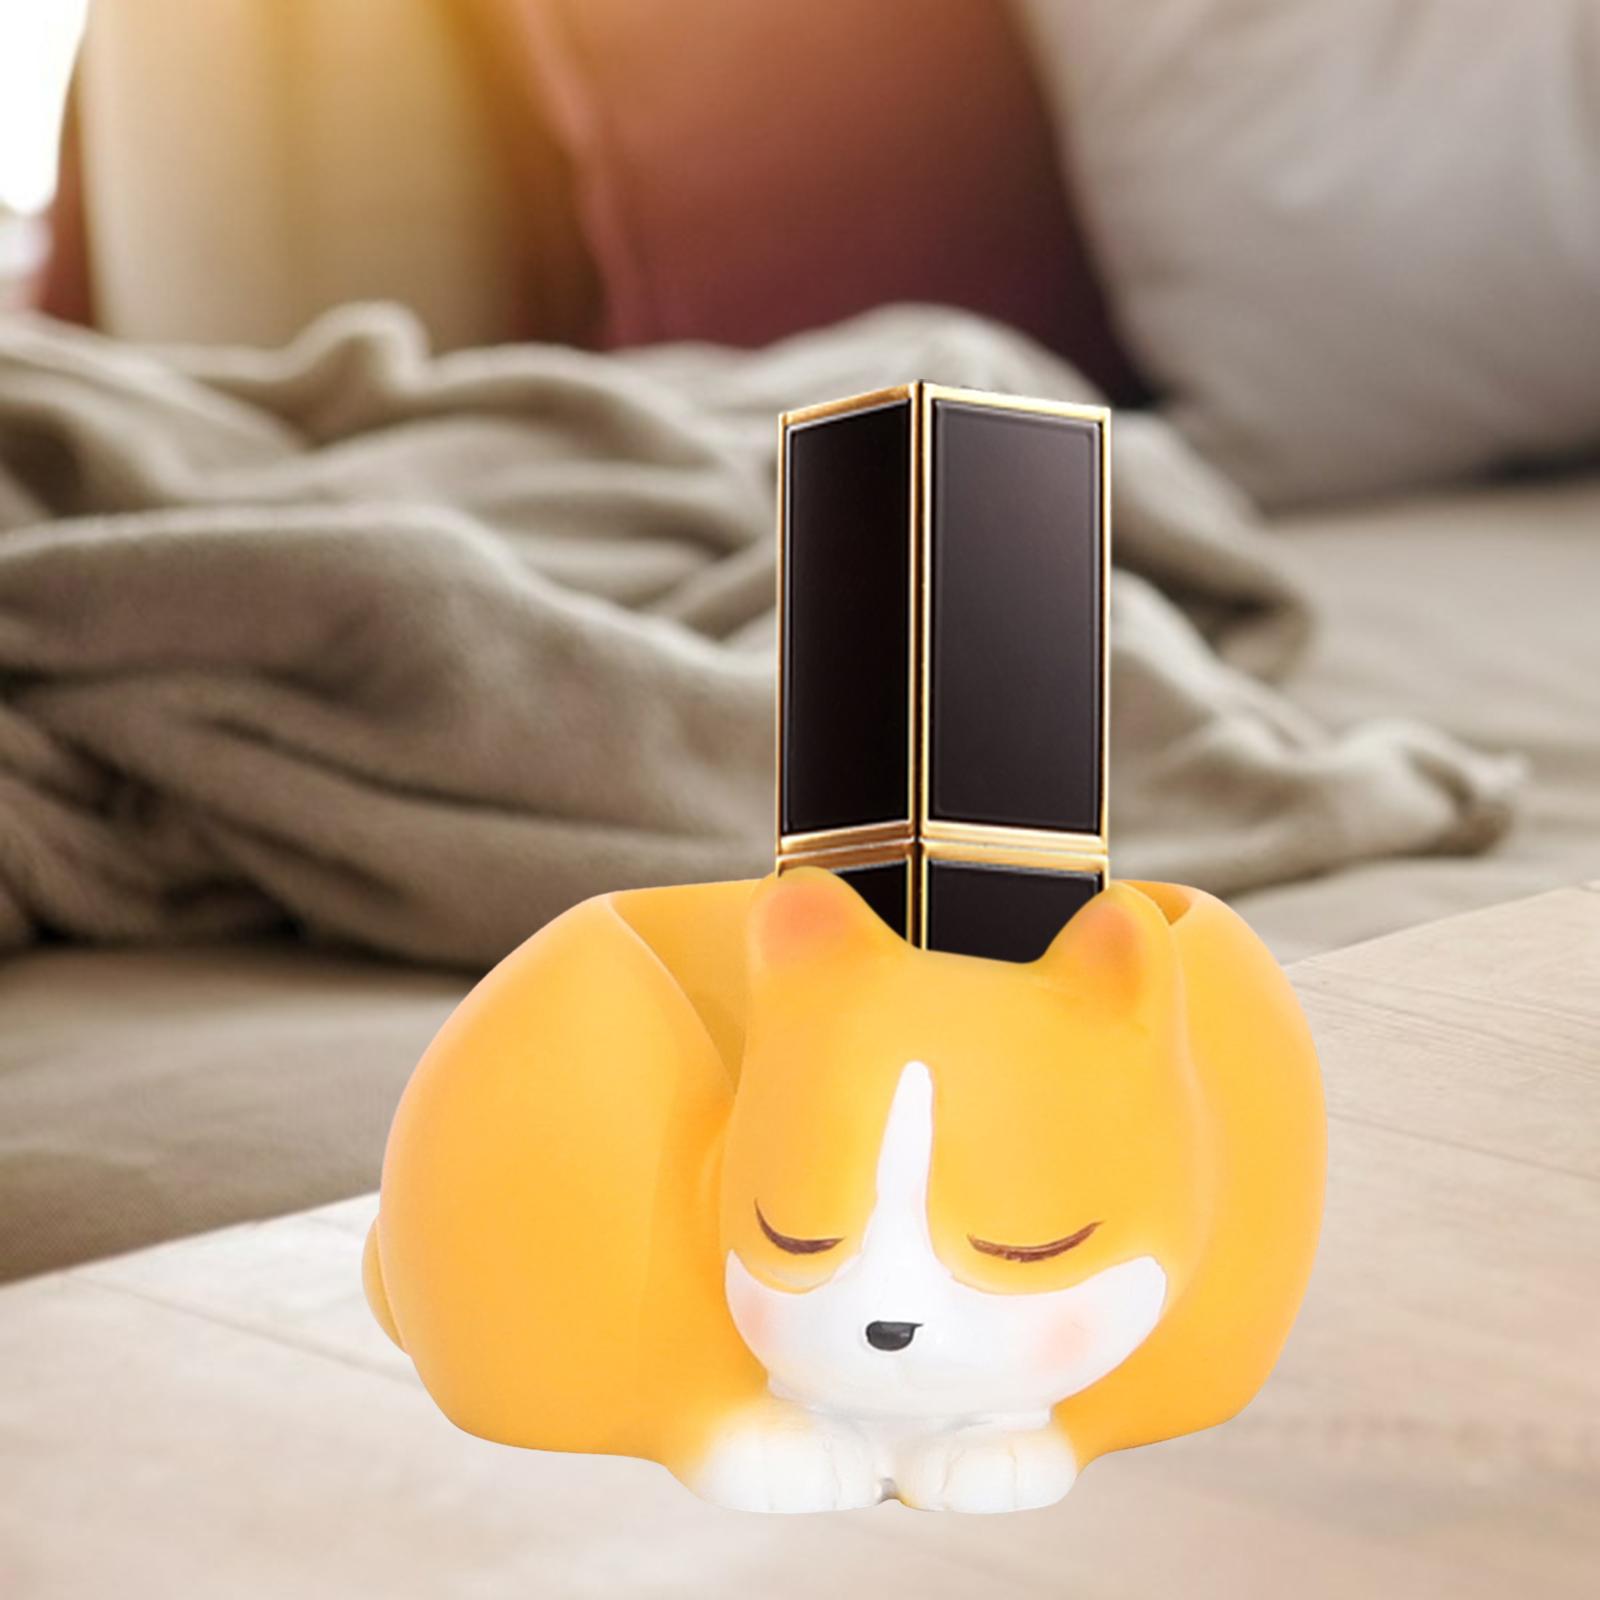 Animal Candlestick Decor Objects Collection Candle Holder Resin for Home Corgi